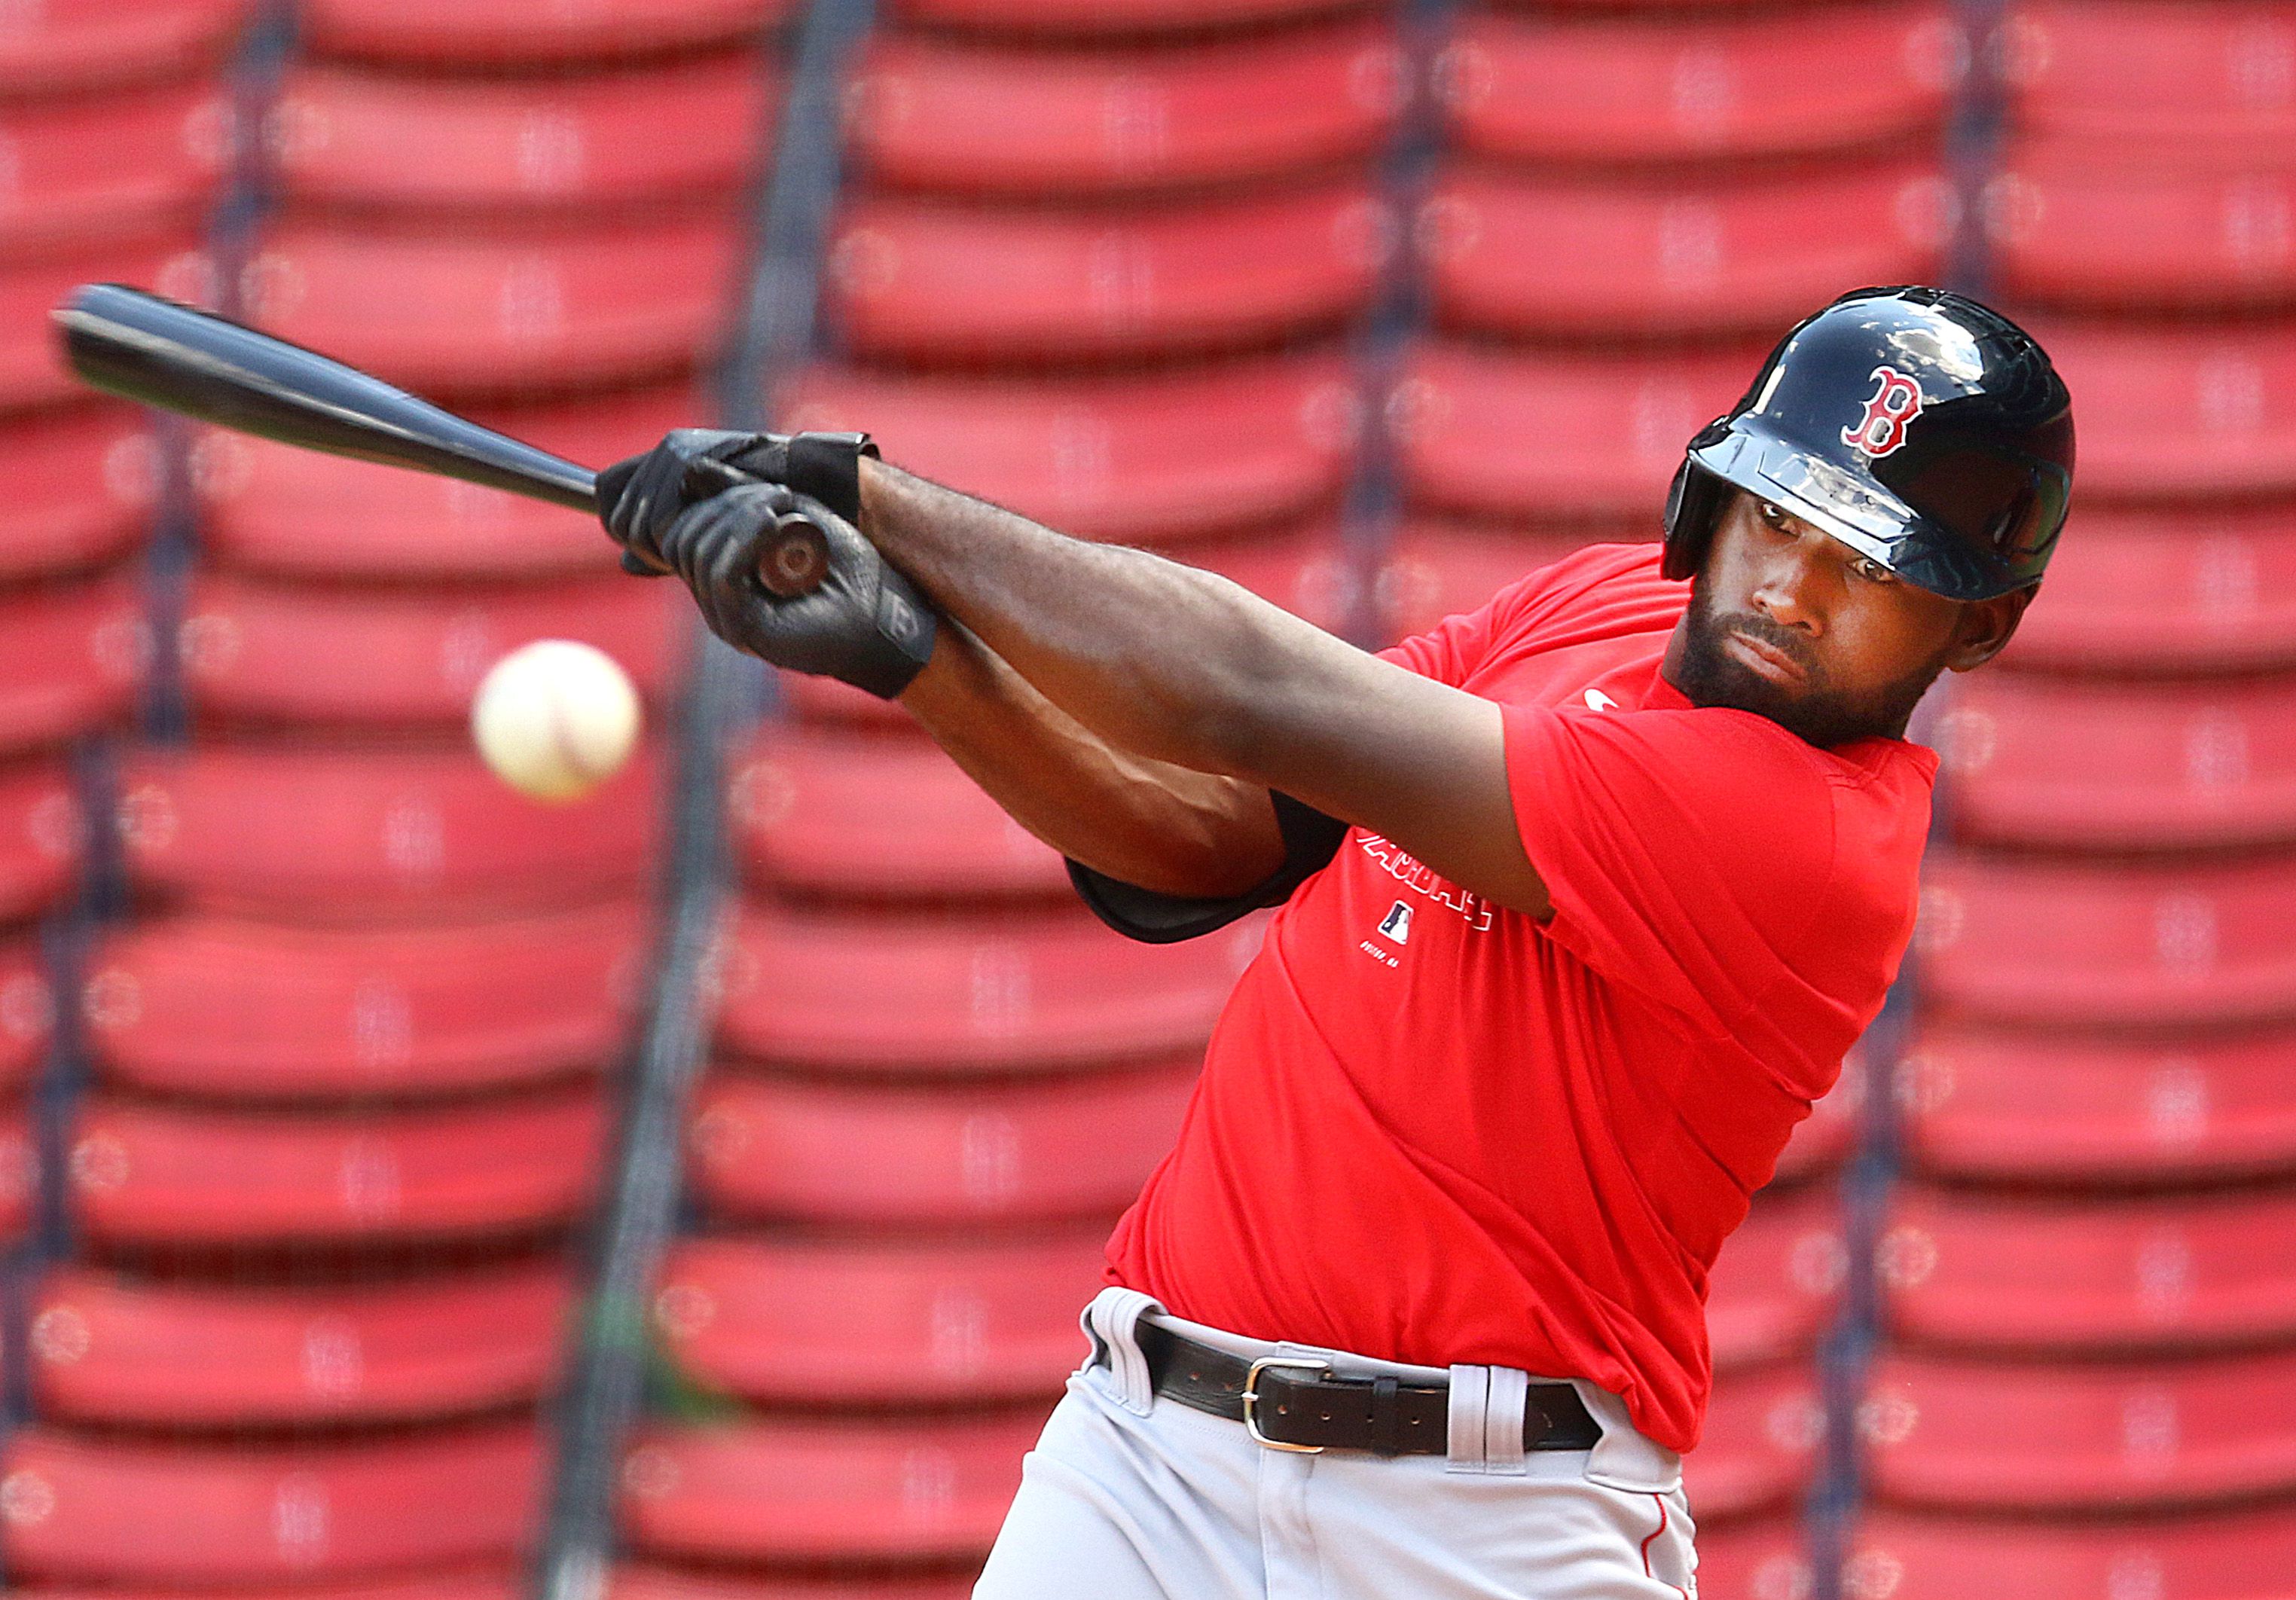 With one minor adjustment, Jackie Bradley Jr. is starting to swing